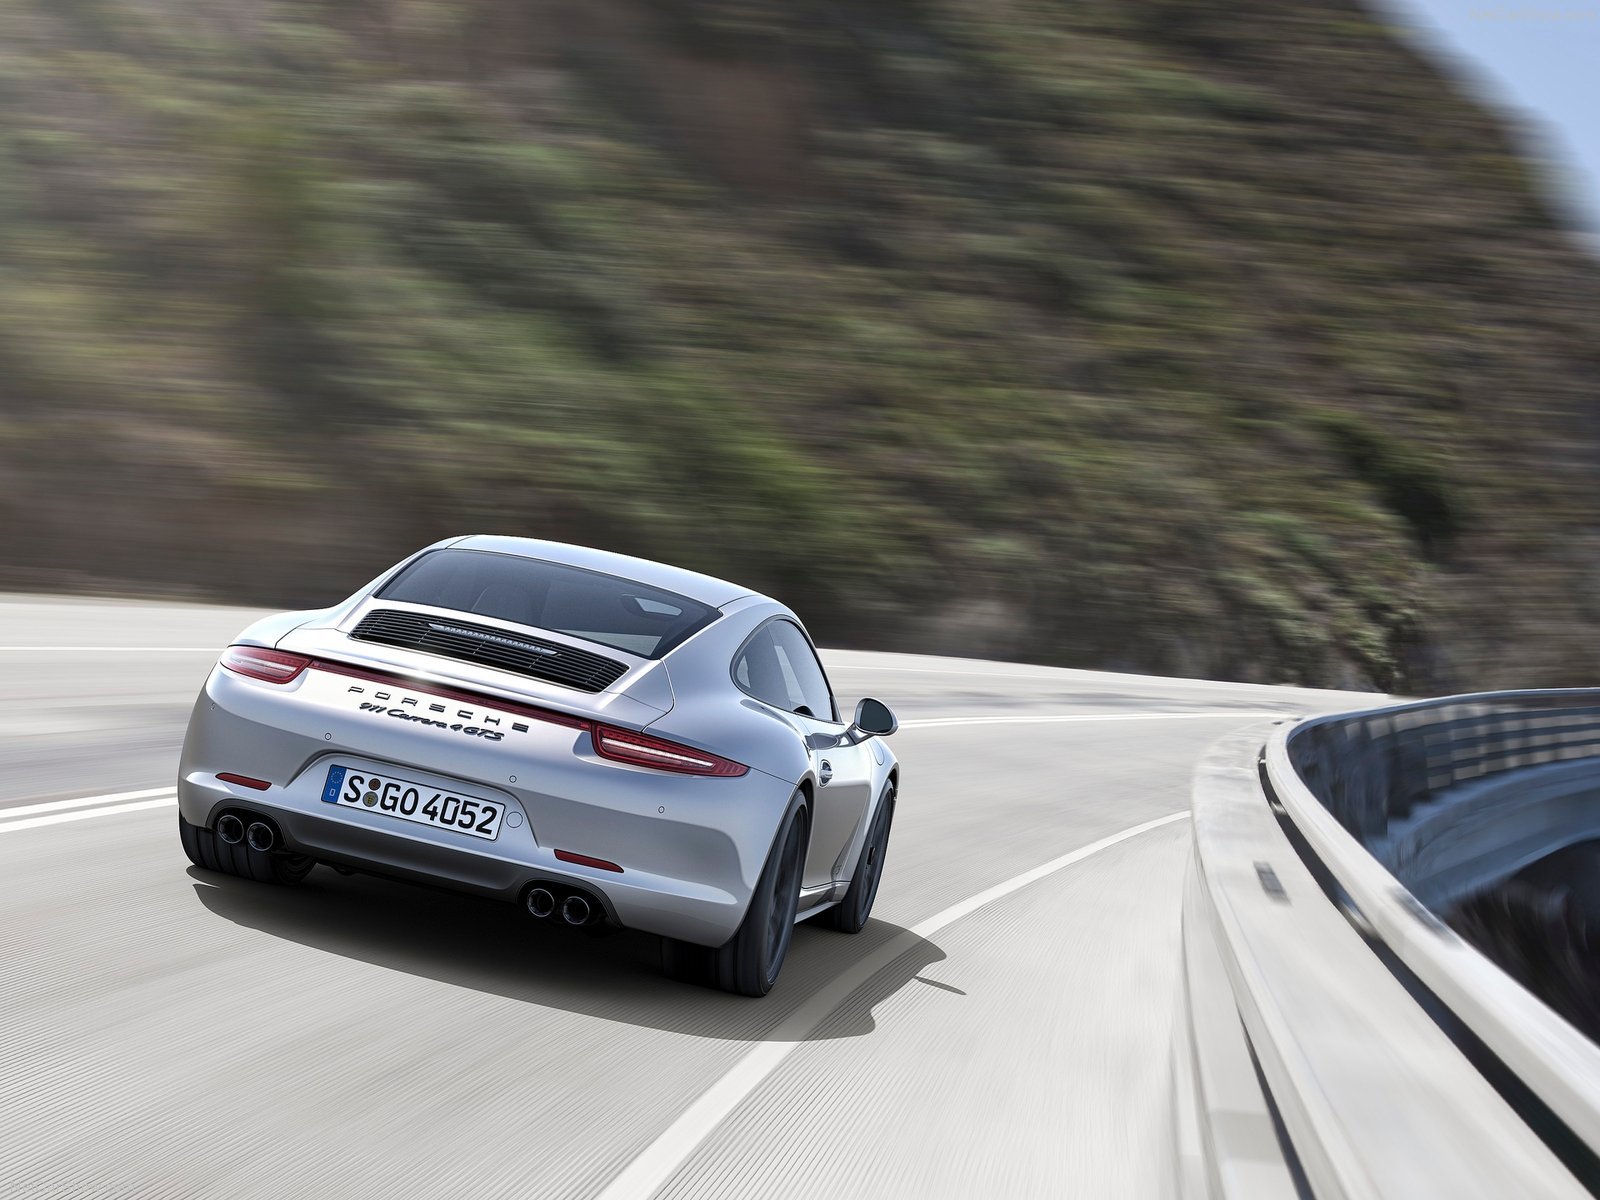 2015, Porsche 911, Carrera gts, Coupe, Supercars, Cars, Germany Wallpaper